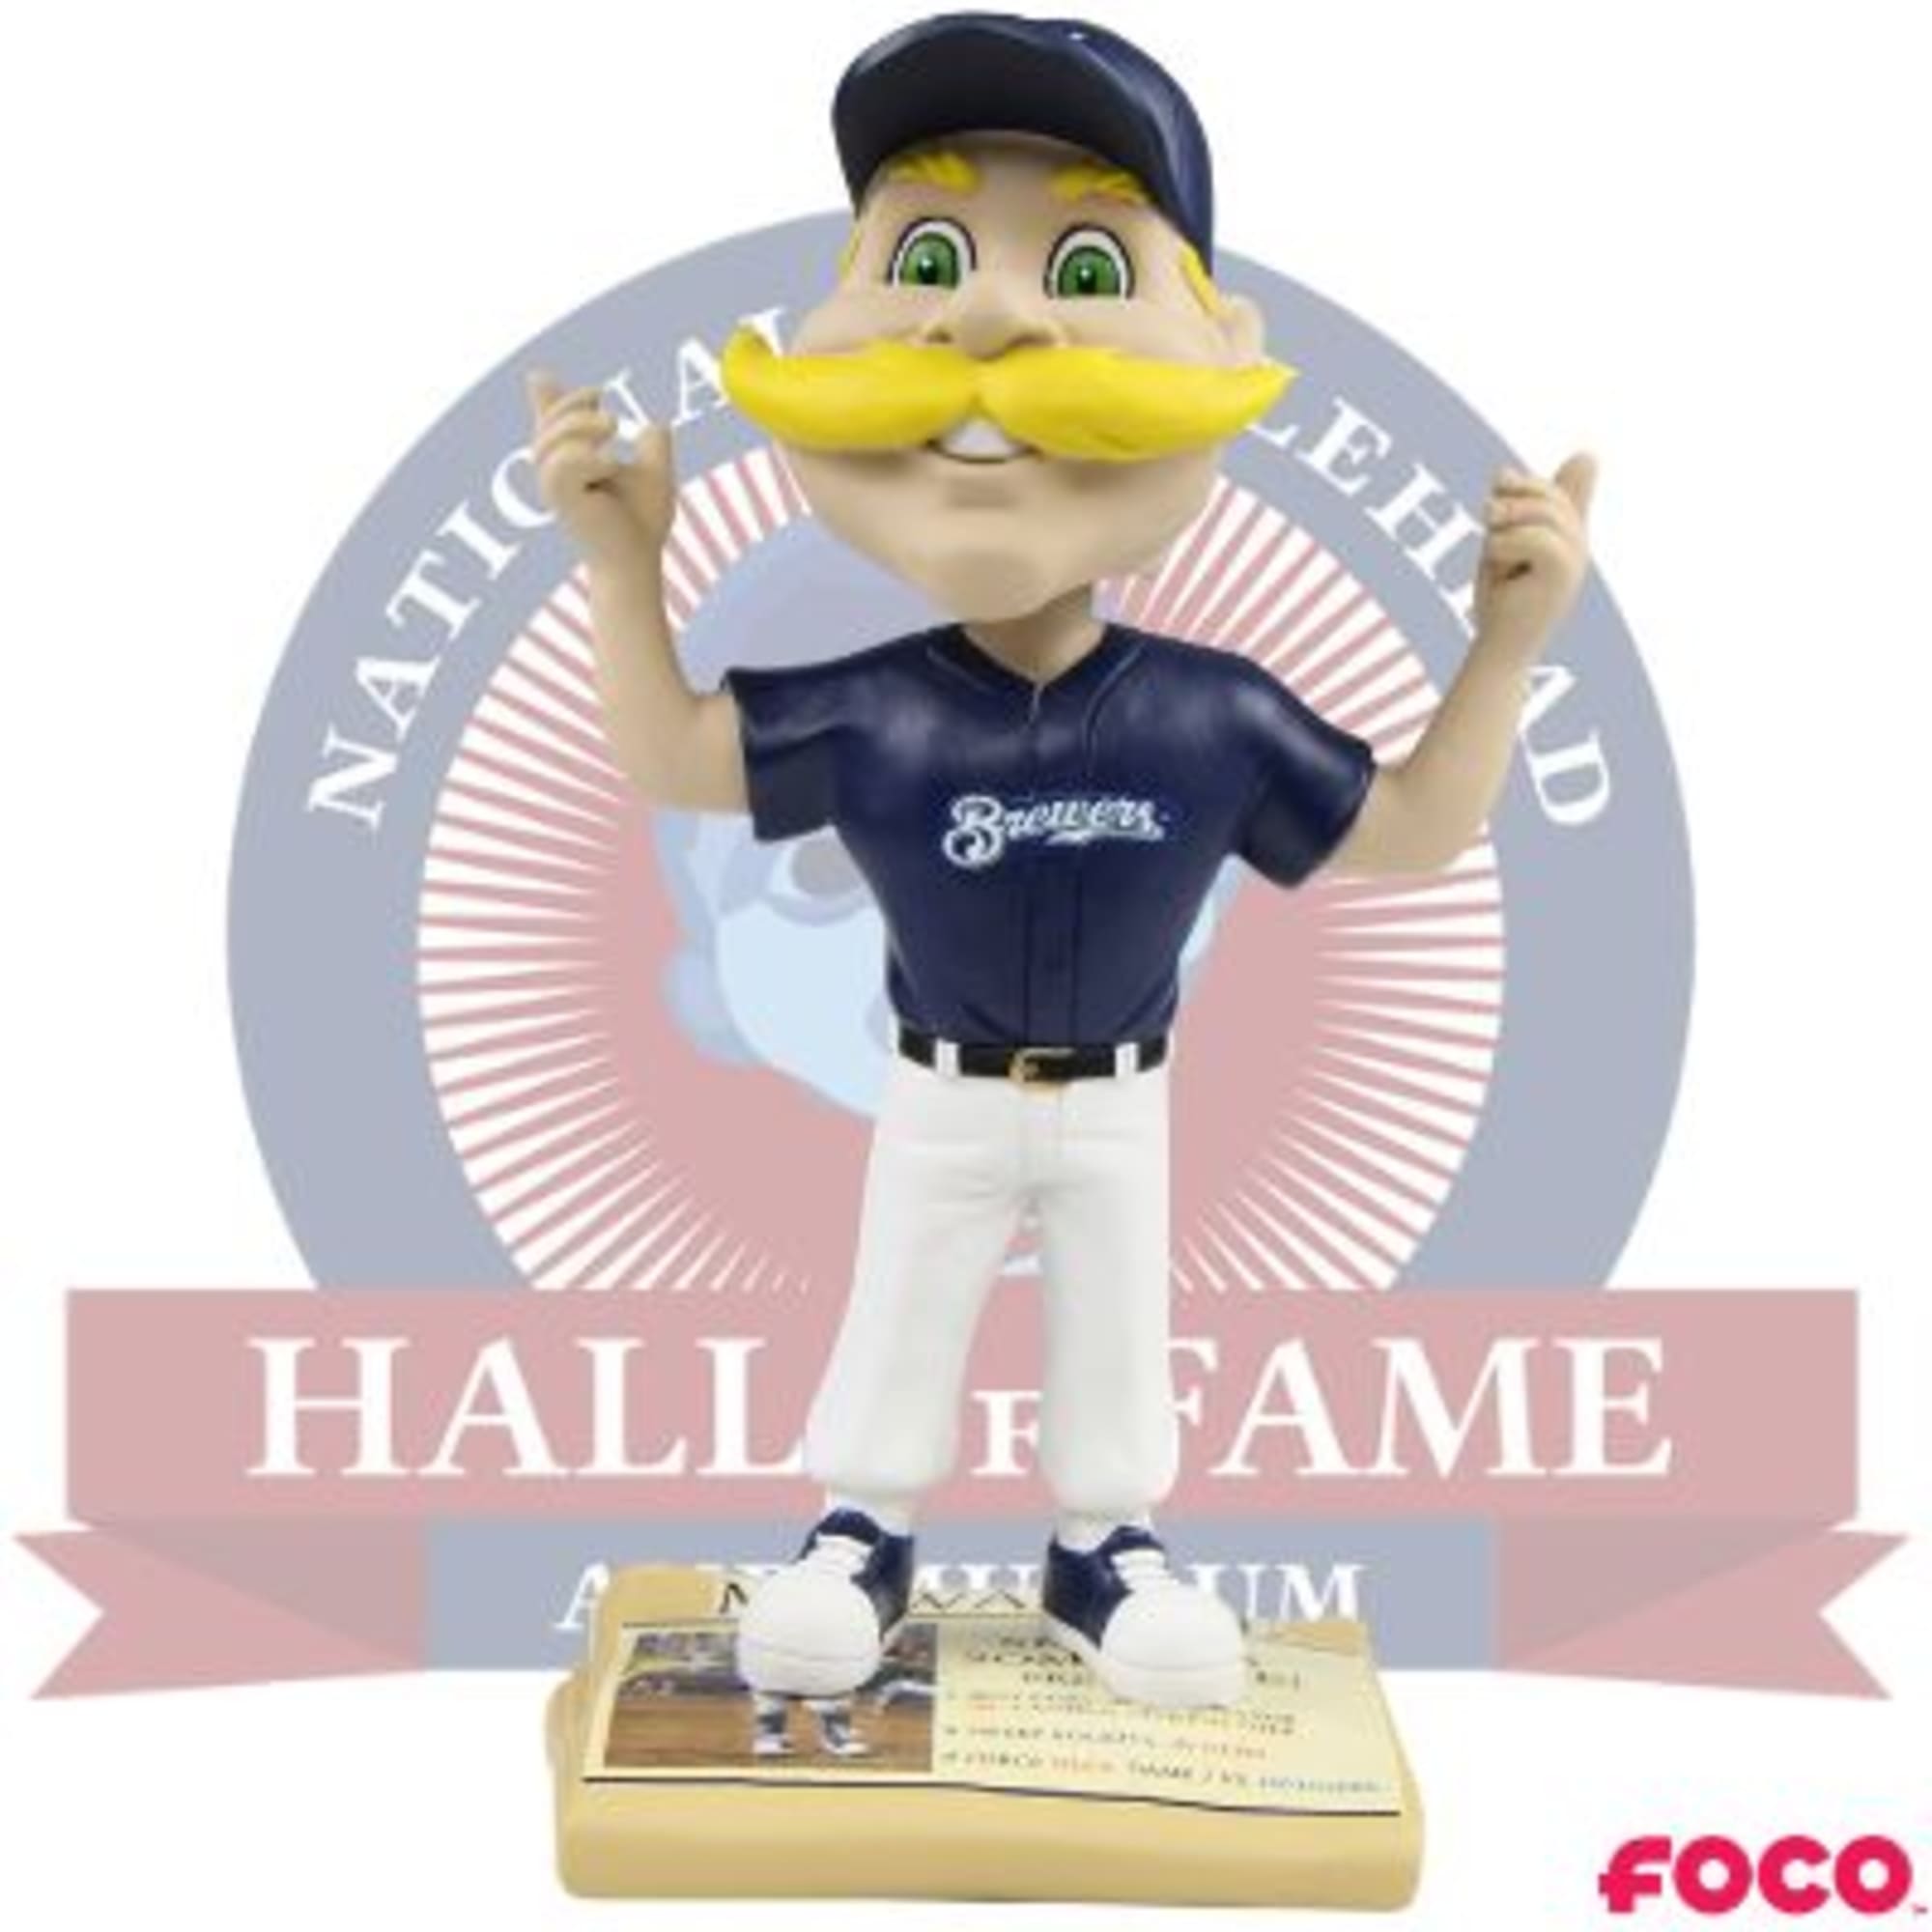 Milwaukee Brewers fans need this new bobblehead